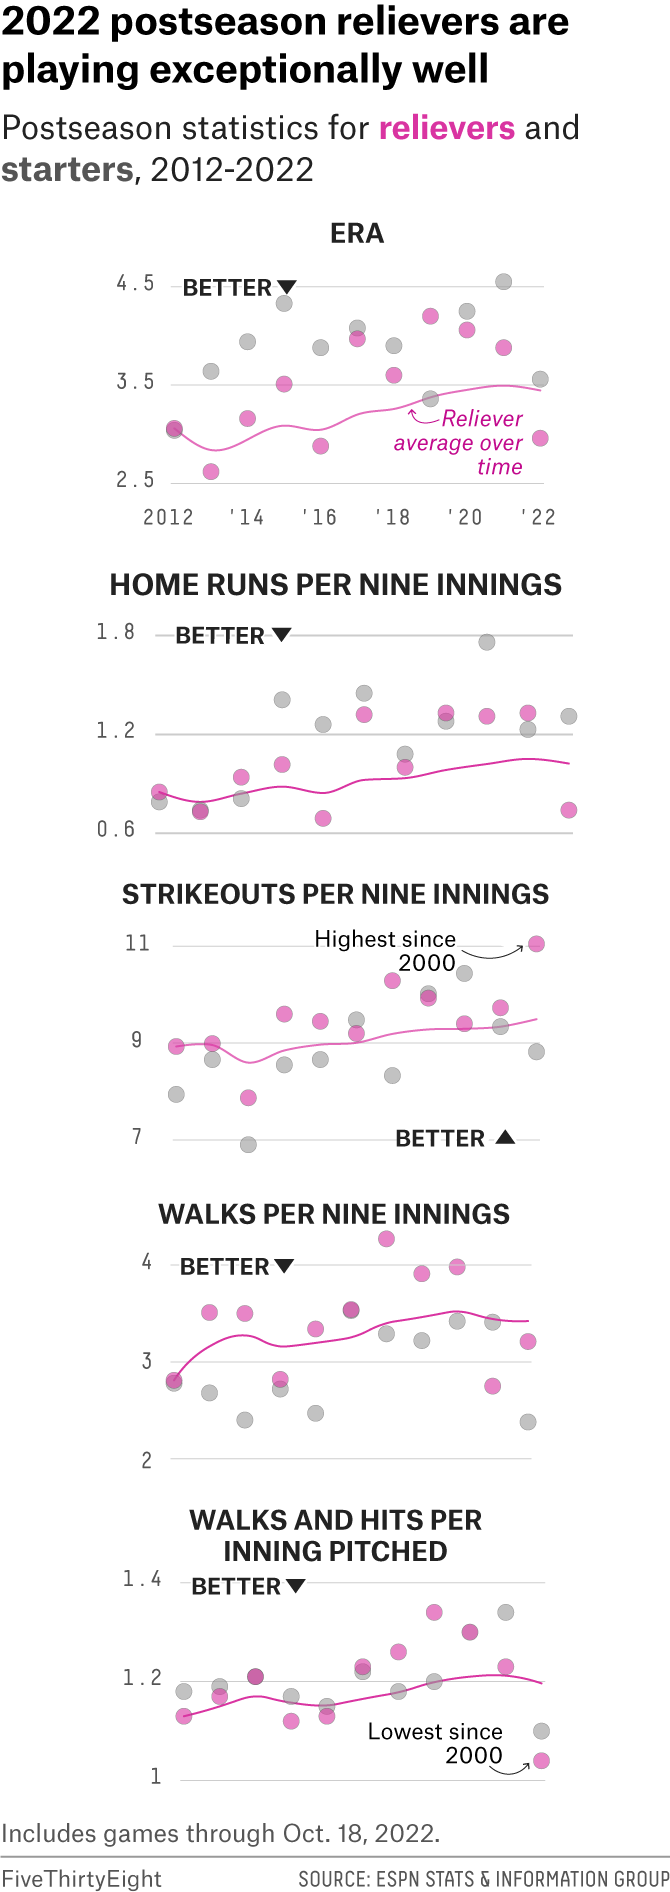 A series of small charts show how postseason relievers are playing better this season than in previous ones across five different metrics. 